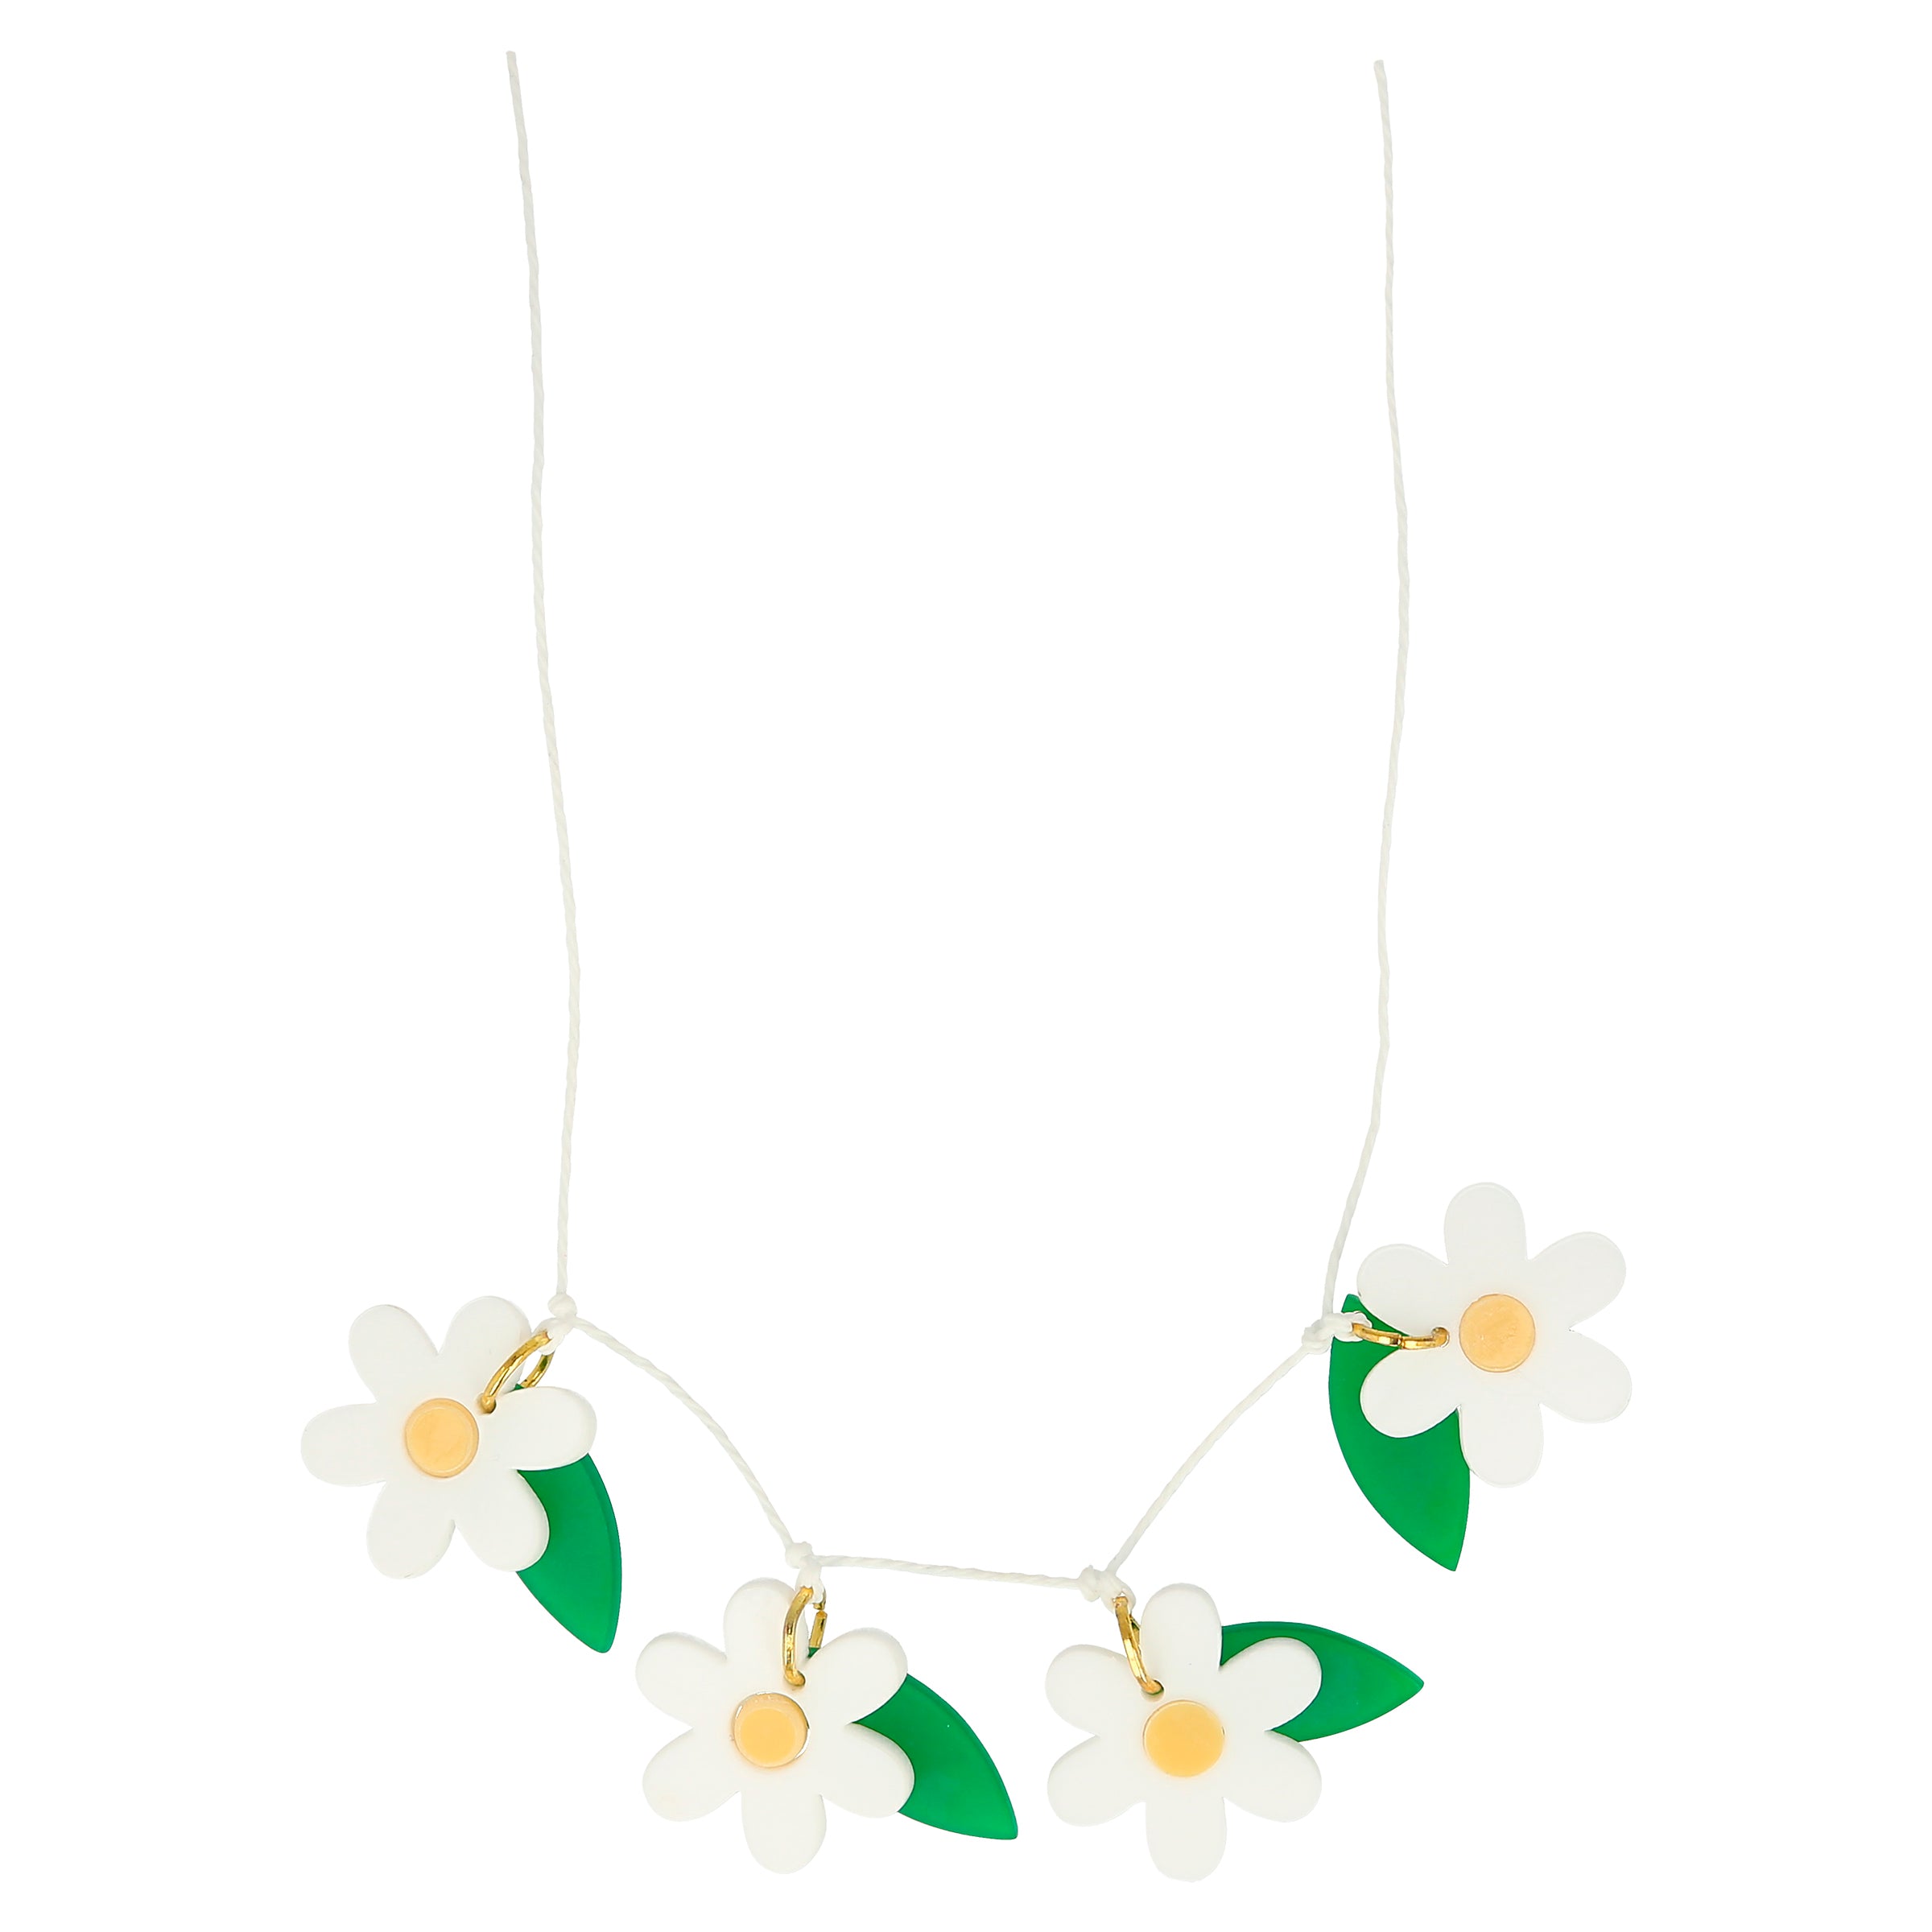 Our colorful daisy necklace is crafted from acrylic with a gold tone chain.